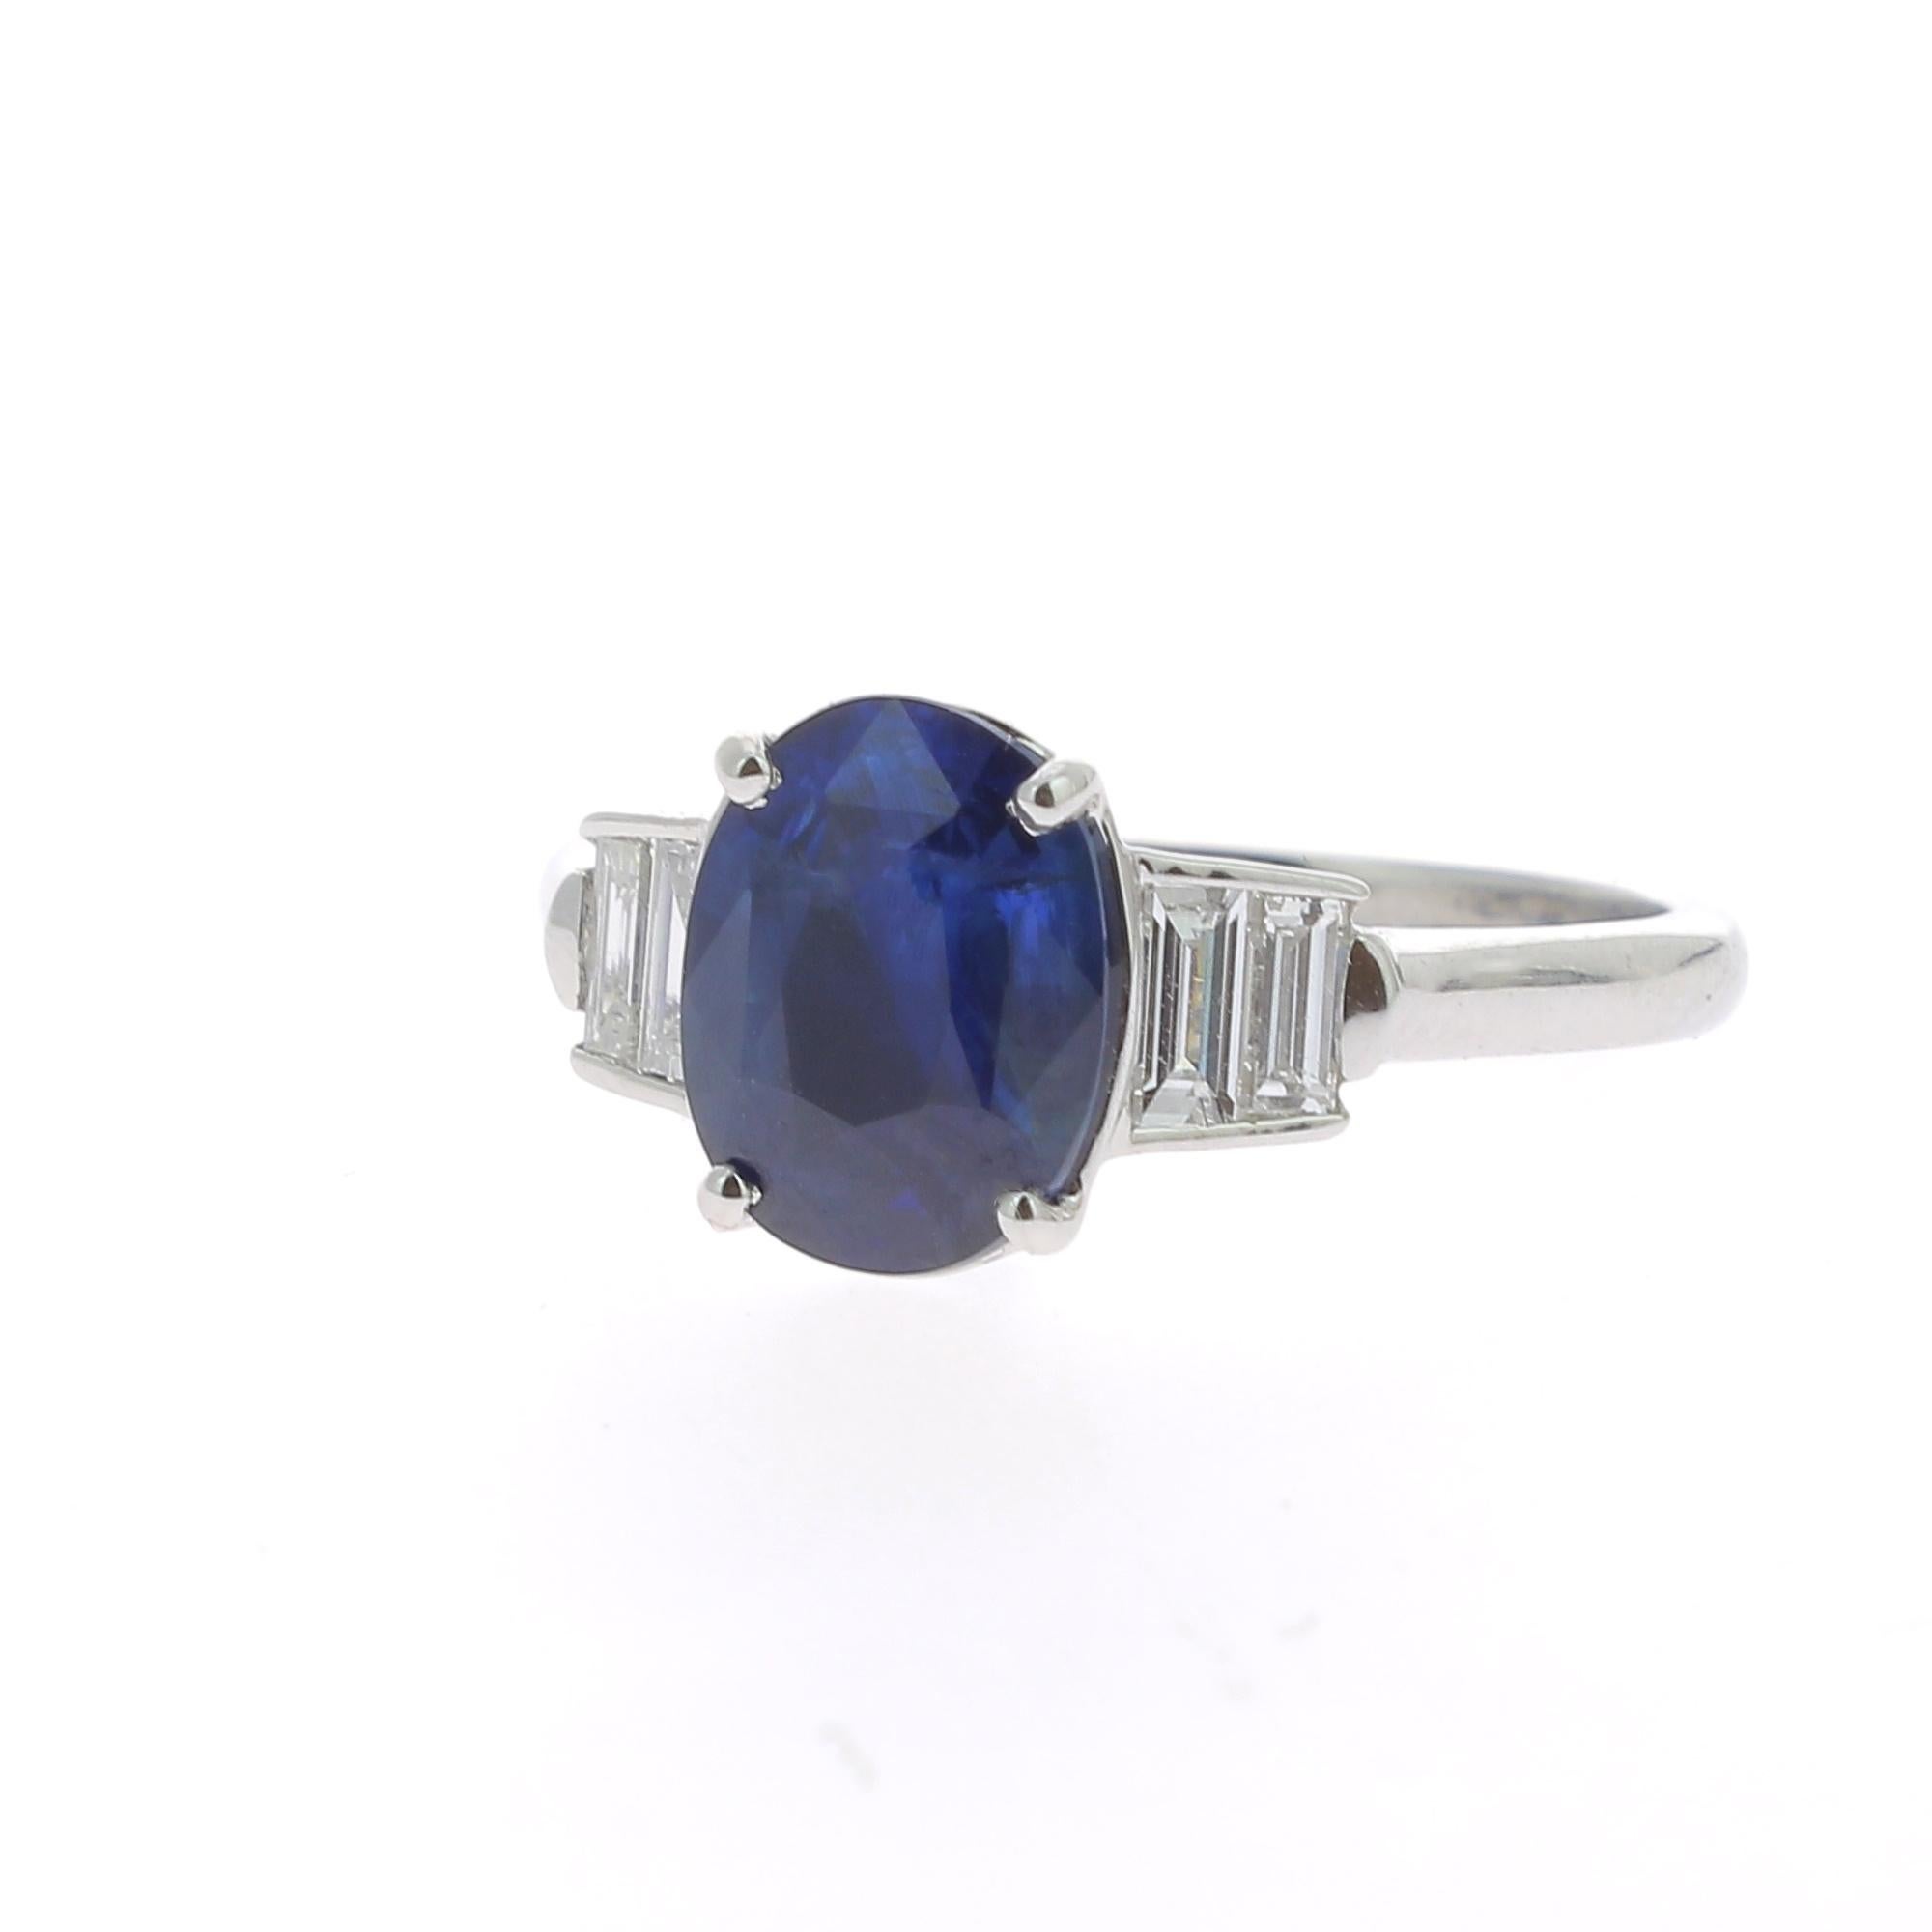 An amazing Blue Sapphire Ring flanked on each side by a 2 Baguette Diamonds.
The total weight of the Sapphire is 2.26 Carats, the gemstone is certified as a Blue Sapphire. 
The Baguette Diamond weight is 0.28 Carats ( 4 Baguettes-cut-Diamonds) 
The